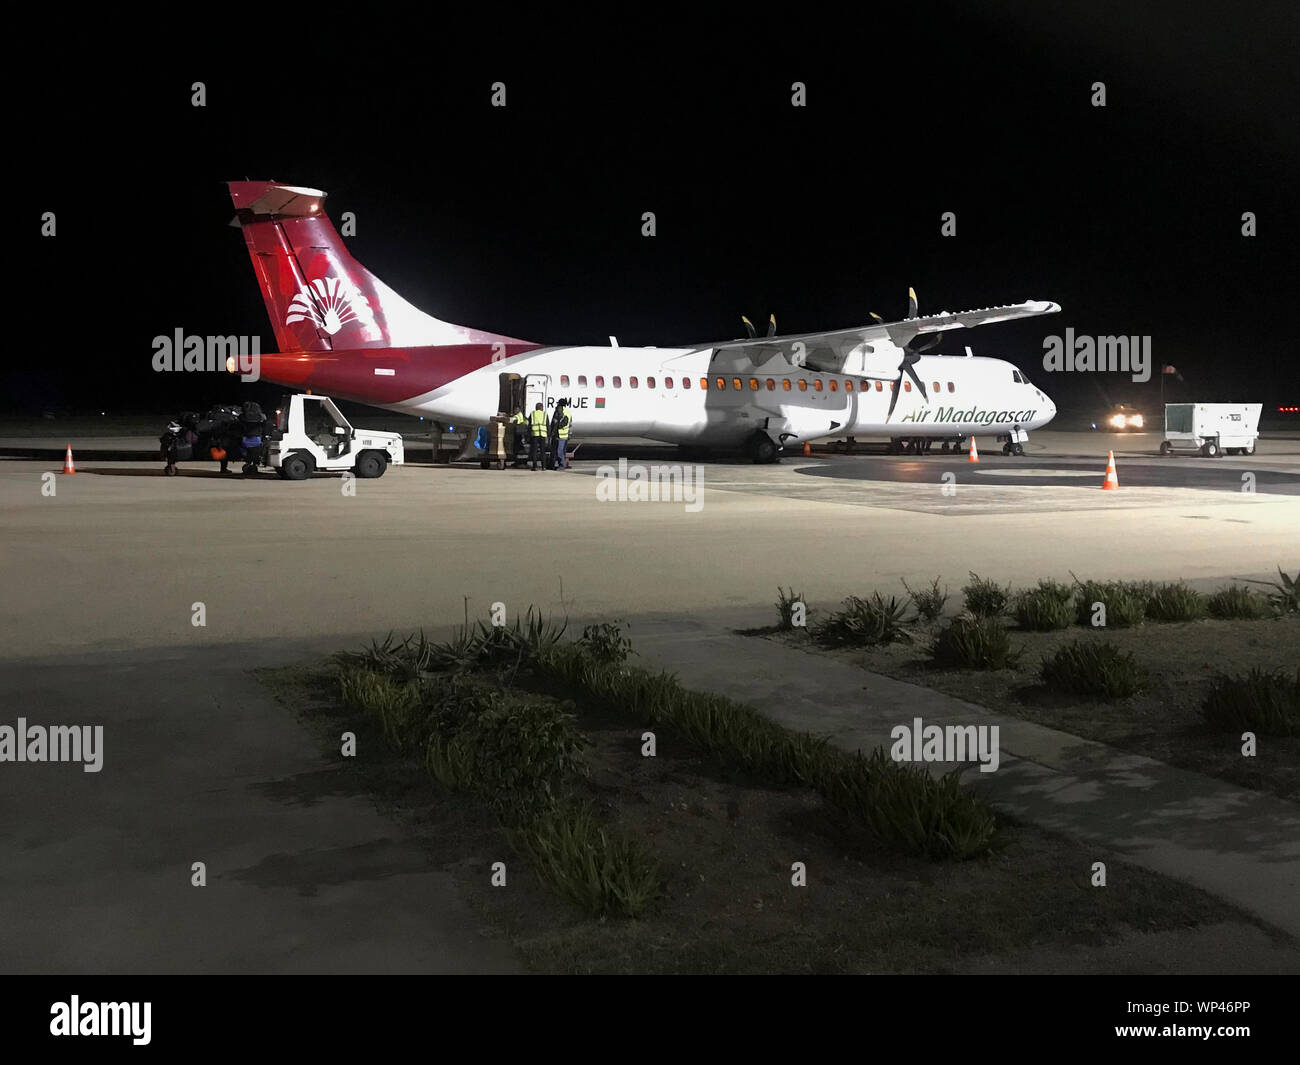 Tulear, Madagascar July25, 2019: Madagascar Airlines ATR 42 twin turbo-prop airliner, made in France, at the airport prepariong for a night flight to Stock Photo